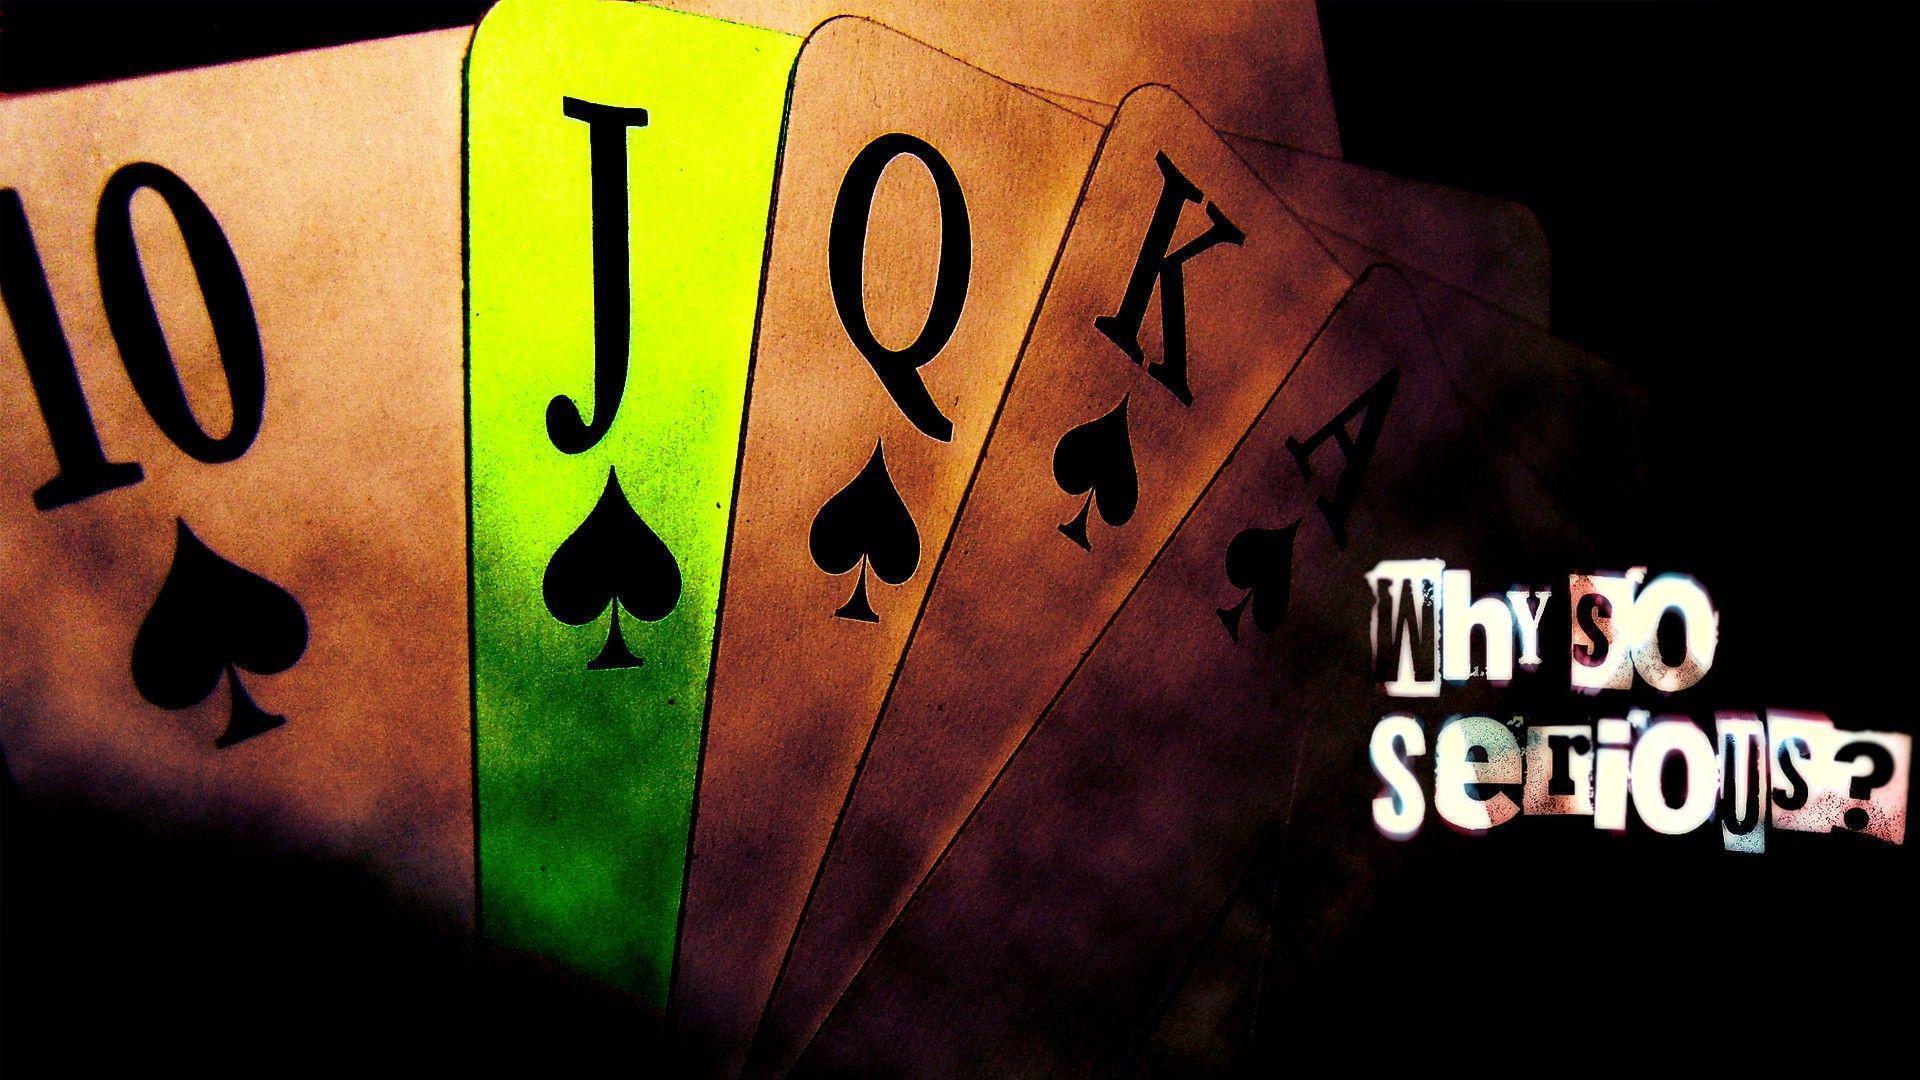 Playing Cards Wallpaper 1920x1080